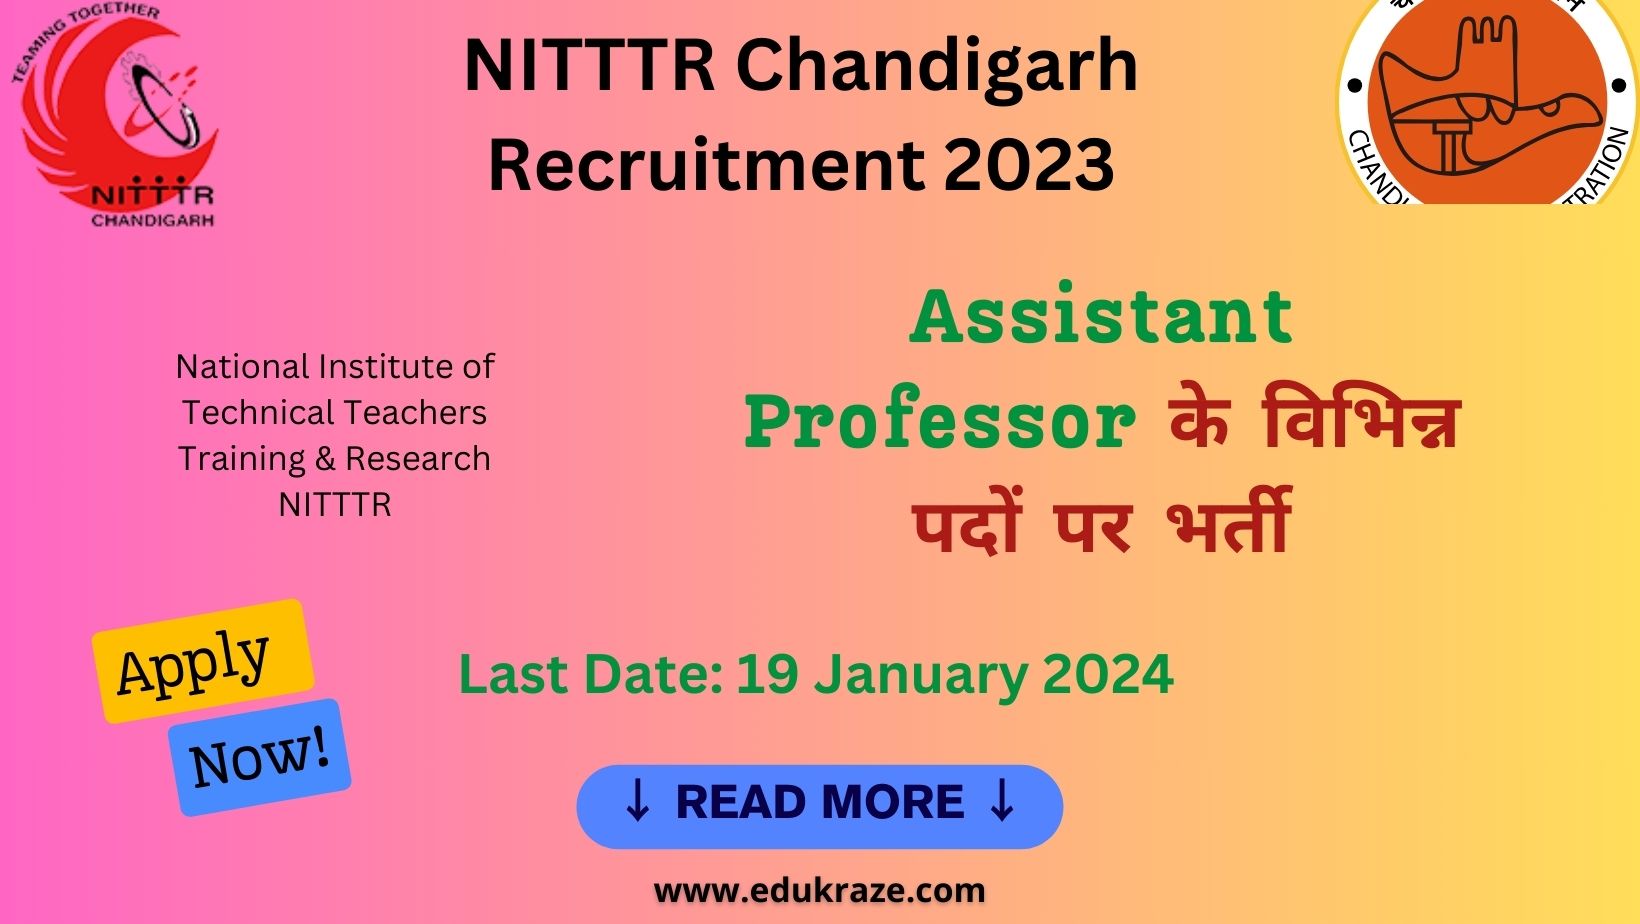 You are currently viewing NITTTR Chandigarh Recruitment 2023 for Assistant Professor | Apply Before 19.01.2024